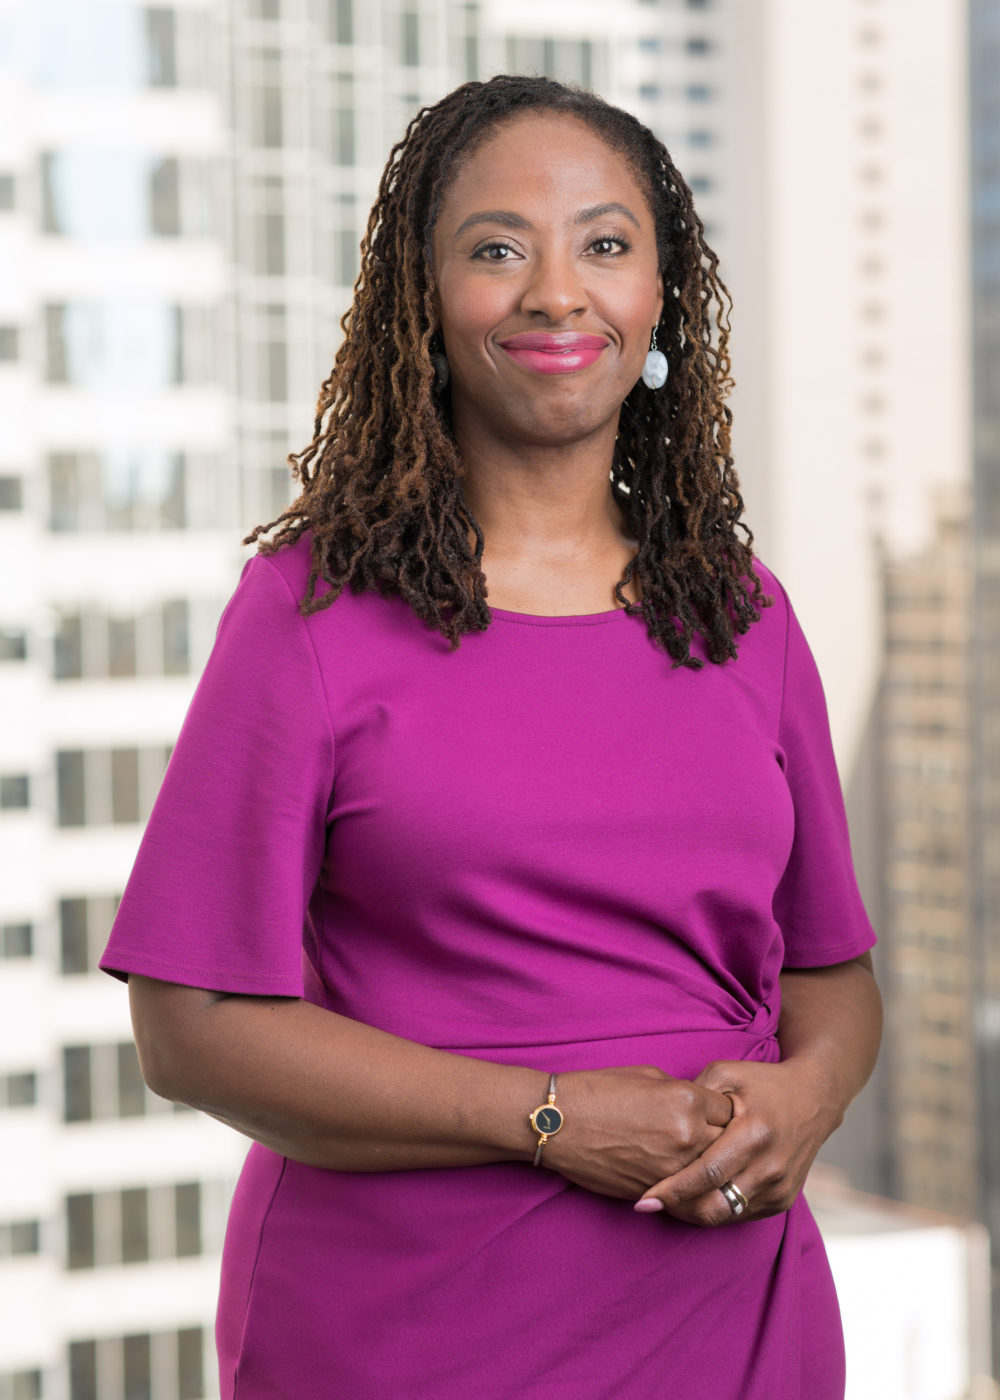 a dark-skinned woman with brown, medium-length hair in small curly locs, wearing a magenta dress gathered at the waist, hands clasped at her hip, smiling in front of a window overlooking a tall office building